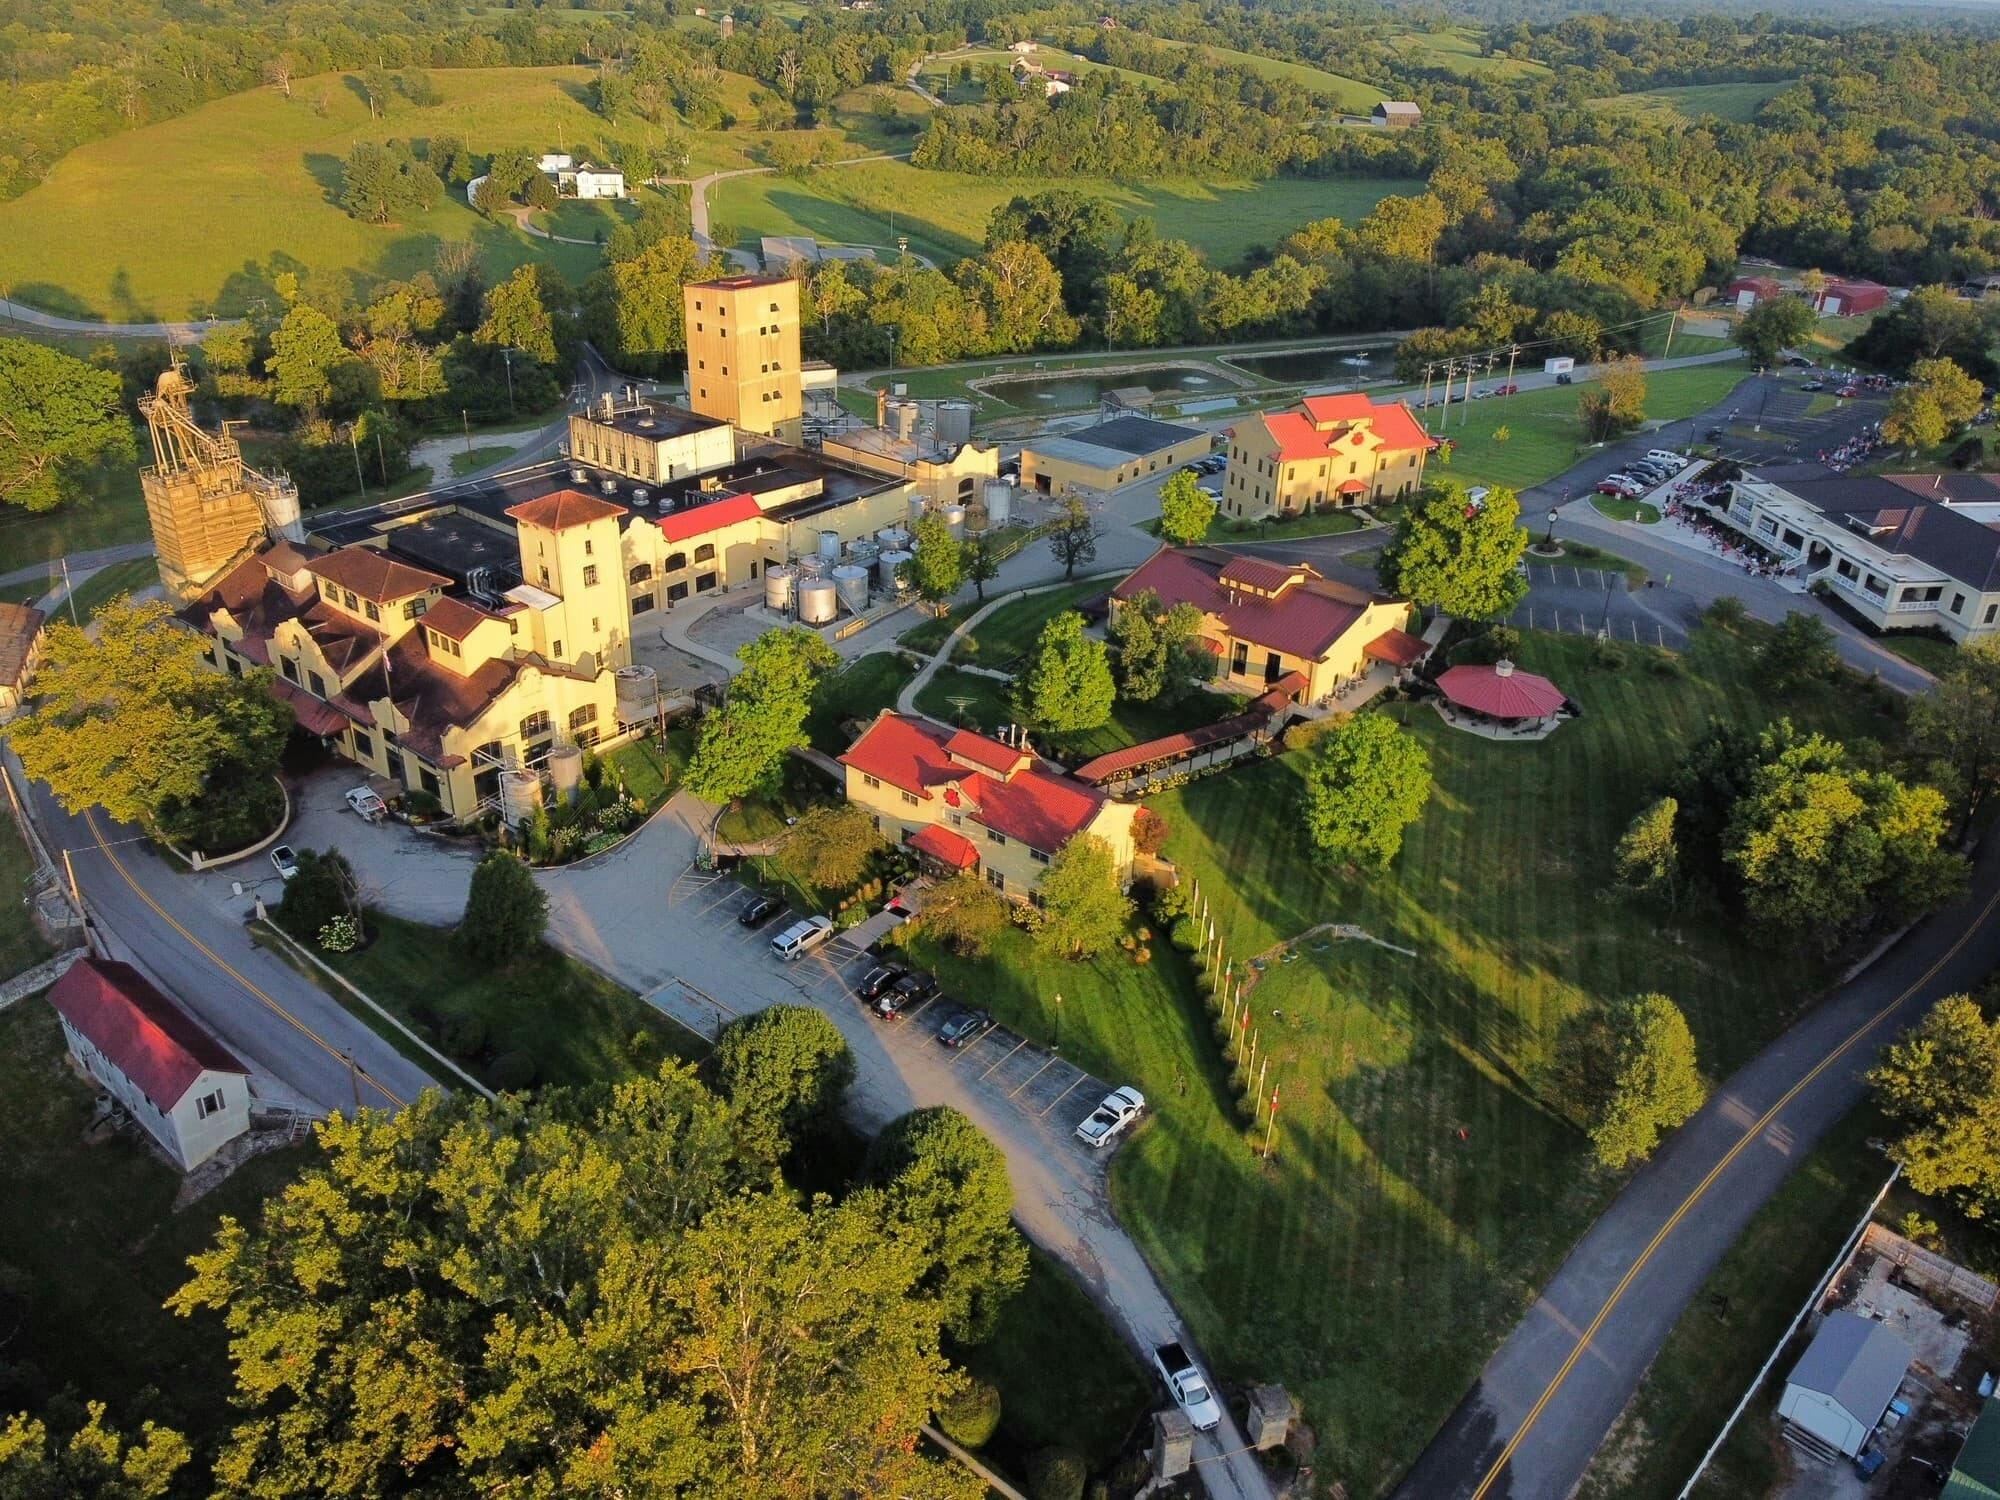 The Four Roses' Distillery and Visitors Center